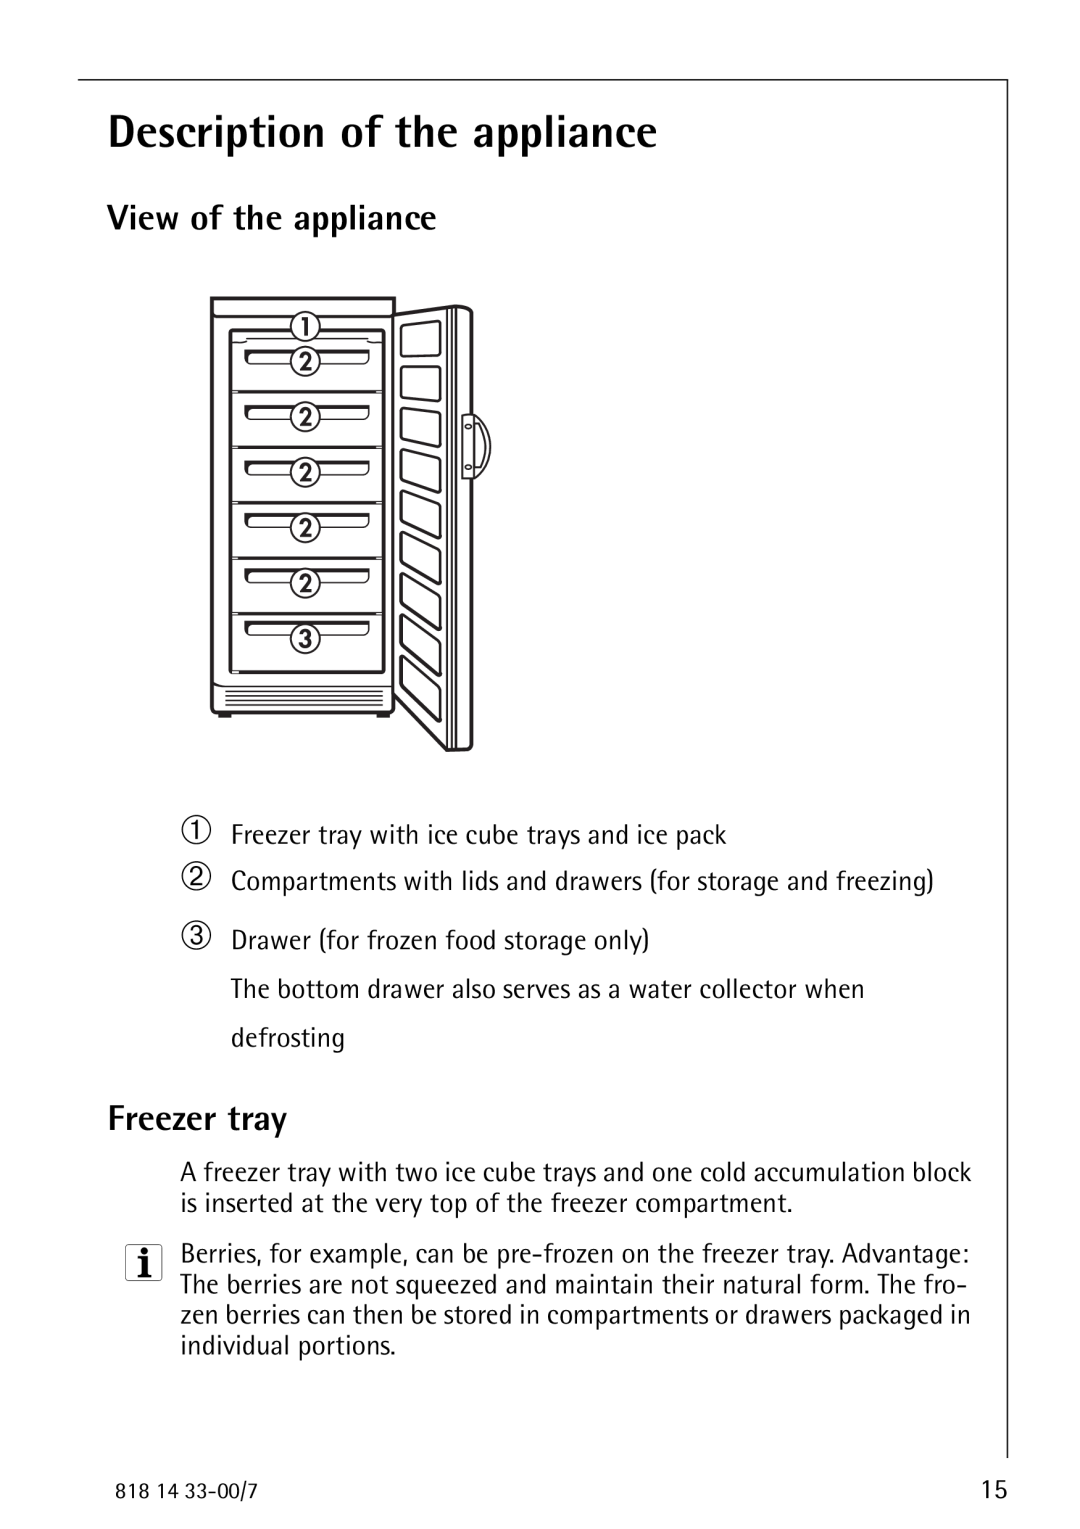 Electrolux 2170-4 operating instructions Description of the appliance, View of the appliance, Freezer tray, ➀ ➁ ➂ 